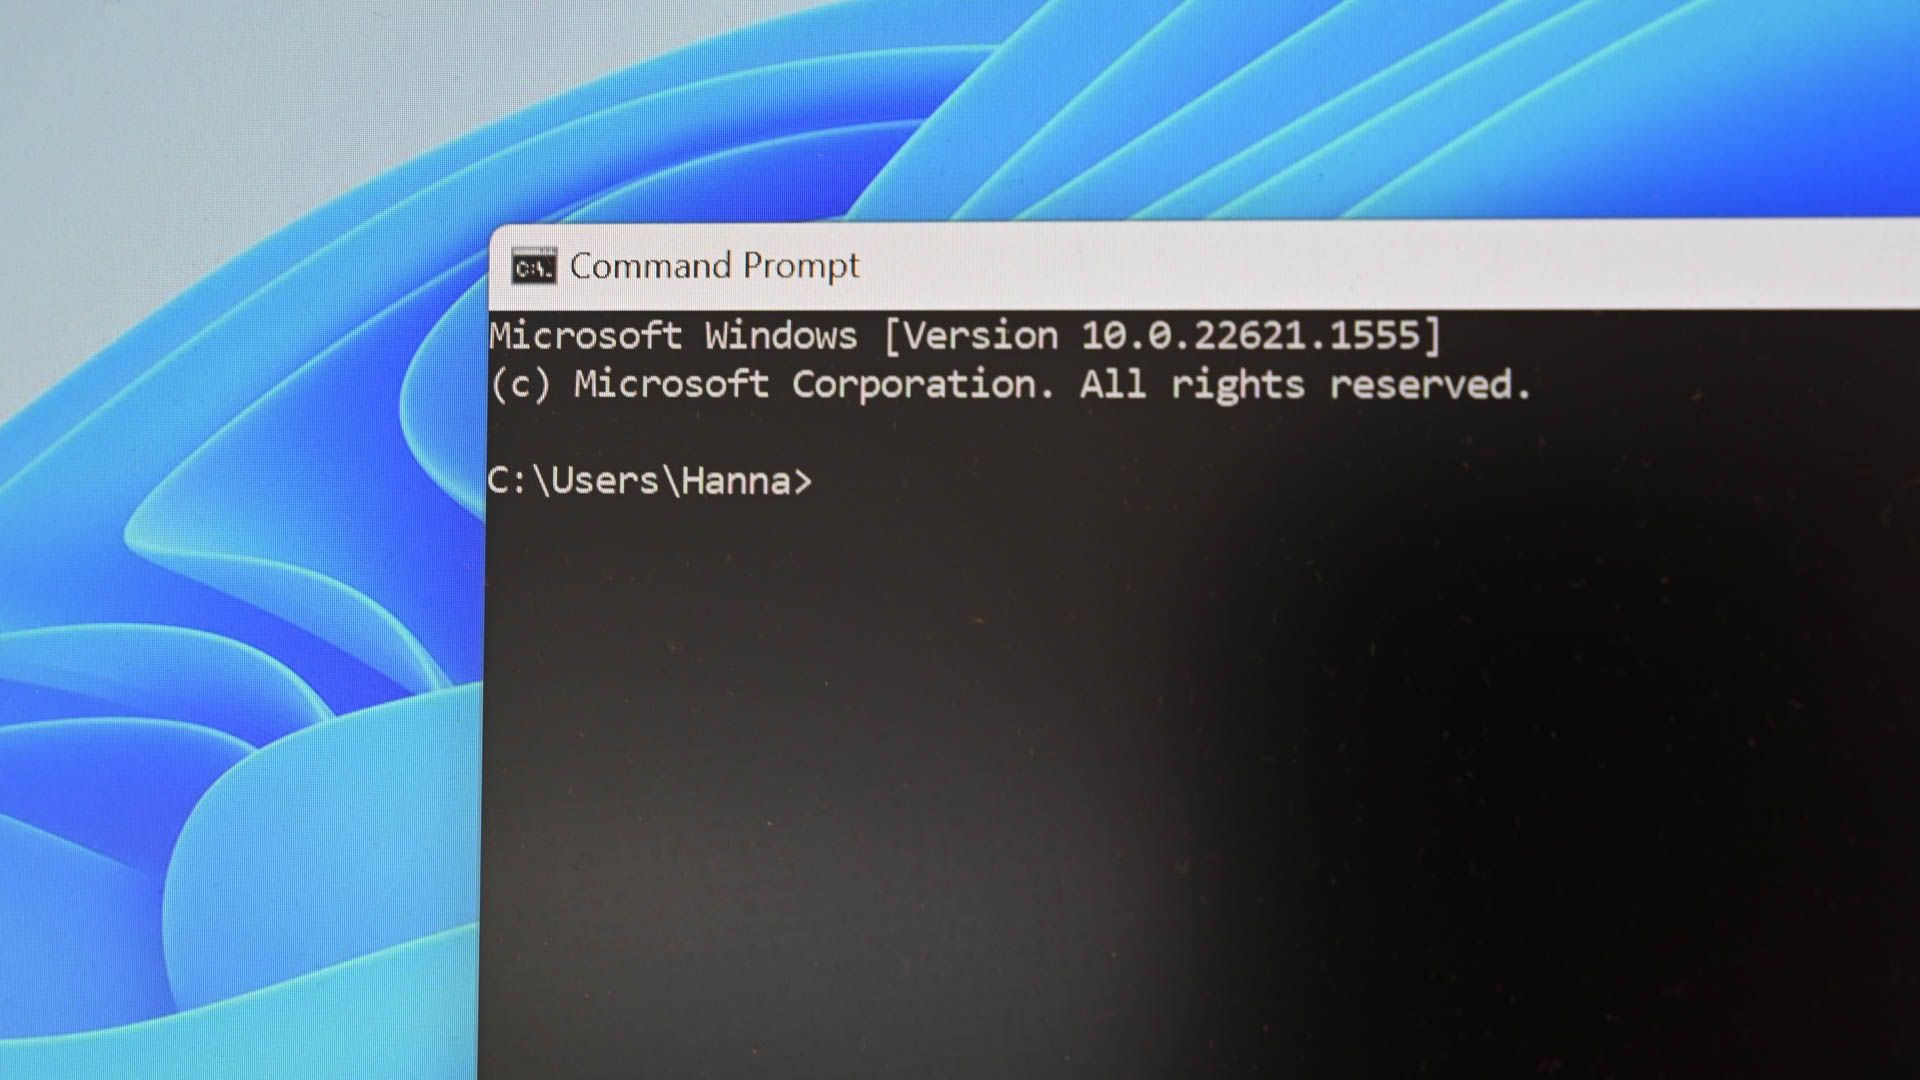 The Command Prompt open on Windows 11